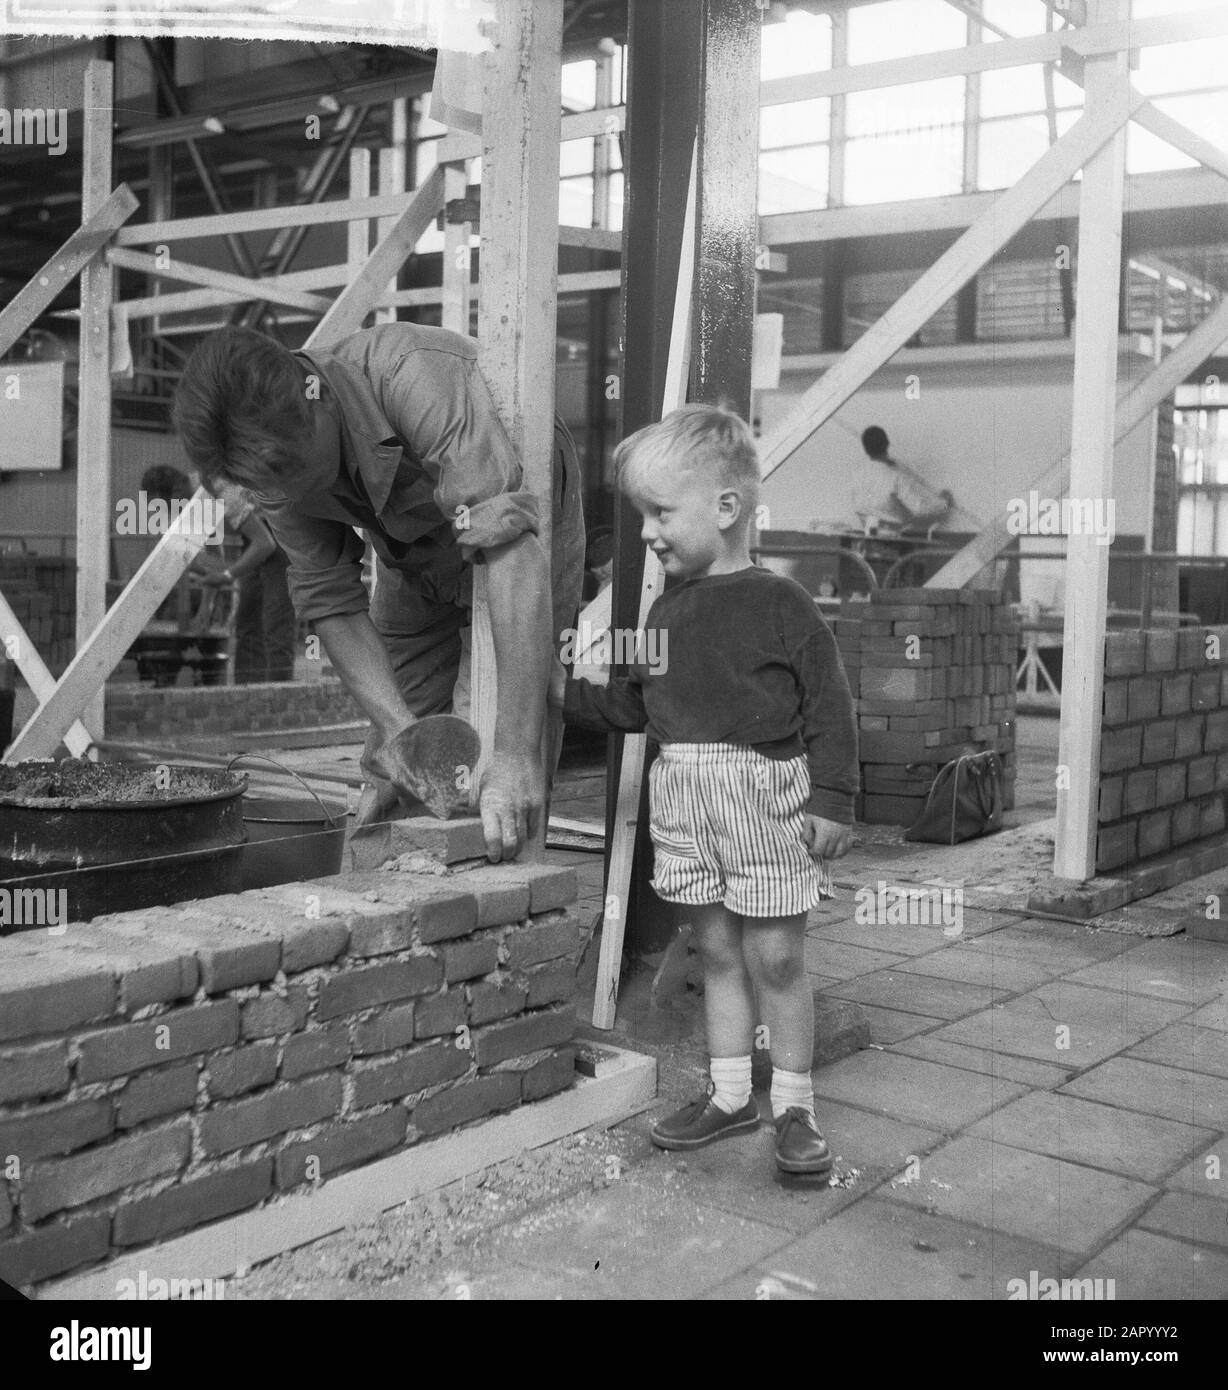 Masonry match at the Ahoy Hall. Little boy looks interested Date: July 5, 1961 Keywords: Bricklaying Setting name: Ahoy Stock Photo